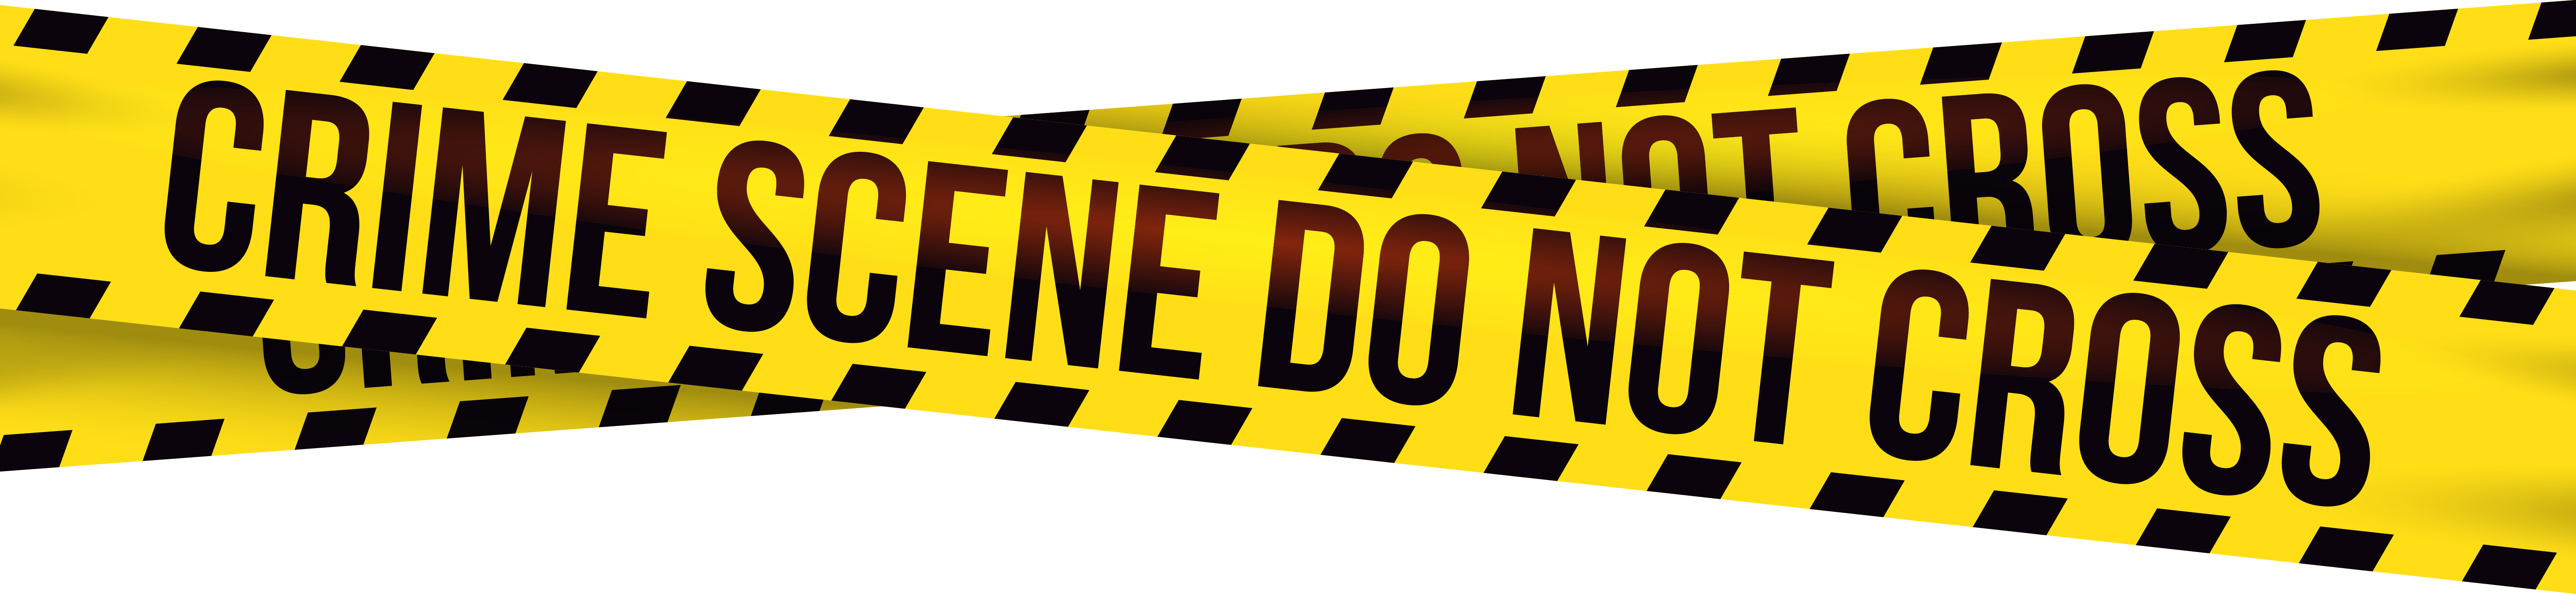 police tape clipart